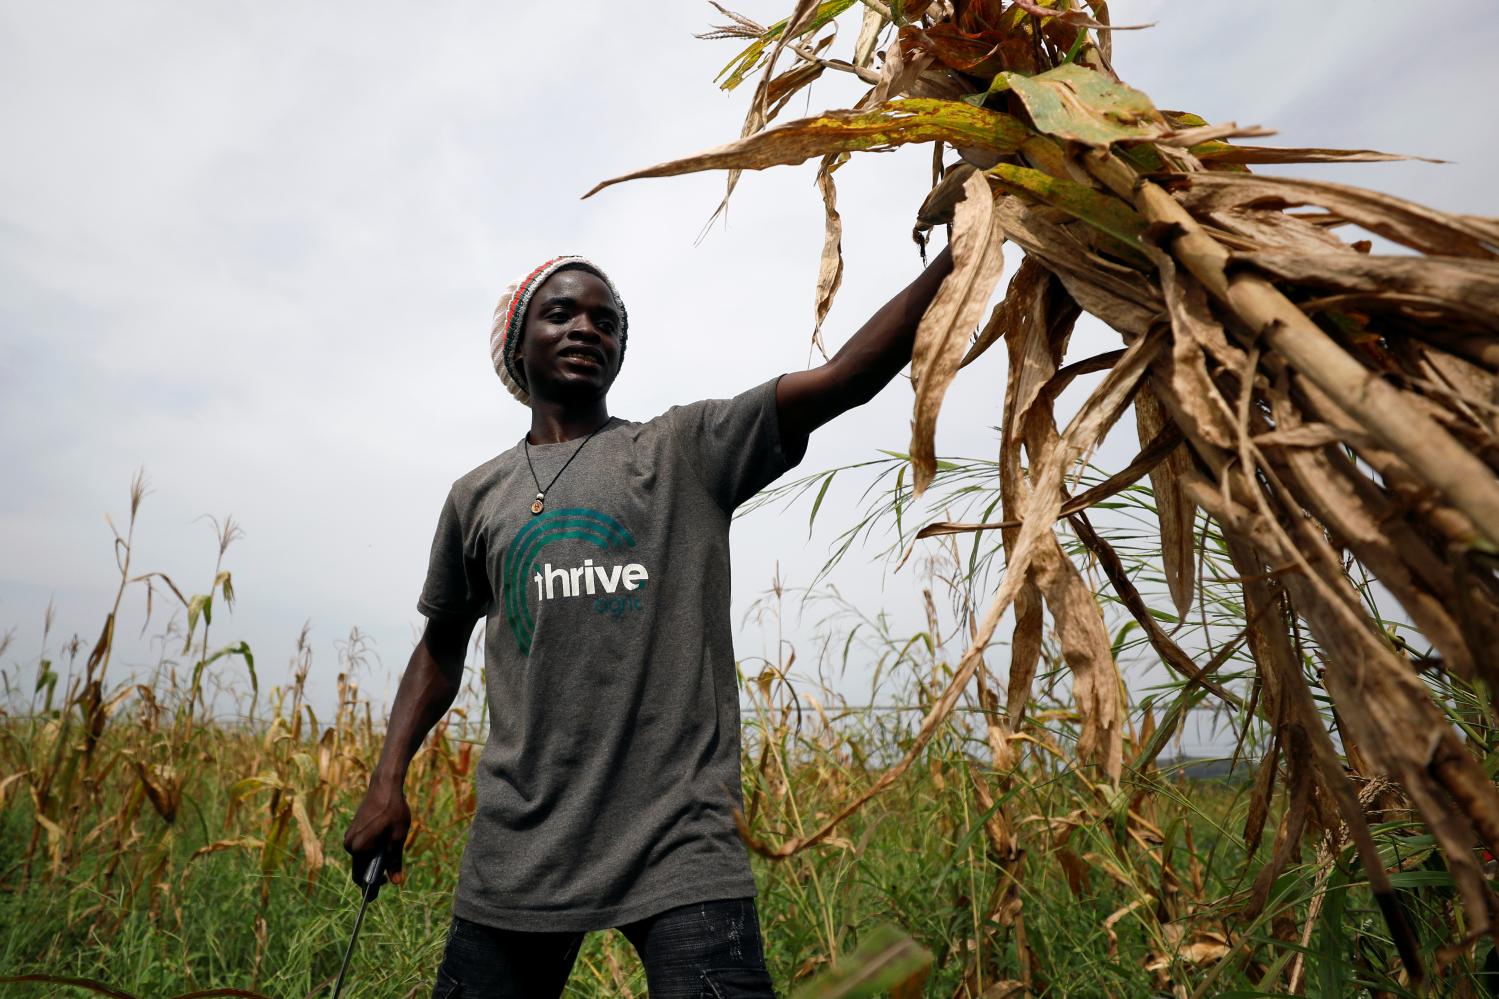 A man carries harvested maize stems on the Thrive Agric's farm in Jere, Kaduna, Nigeria October 10, 2018. Picture taken October 10, 2018. REUTERS/Afolabi Sotunde - RC19B80171A0